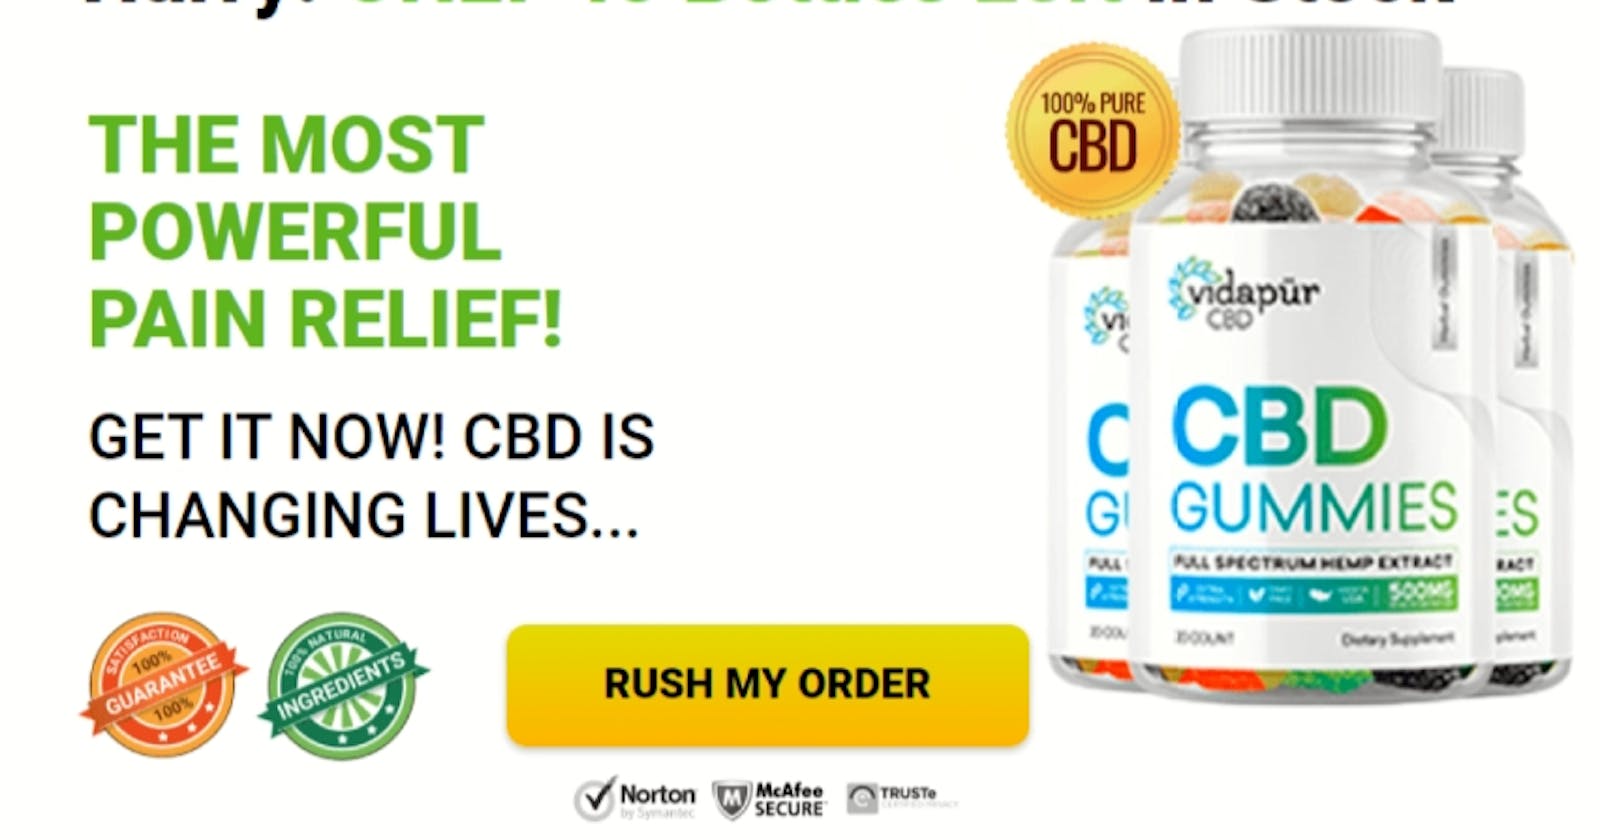 Vidapur CBD Gummies 100% NATURAL INGREDIENTS| Pain Relief & See The Results!